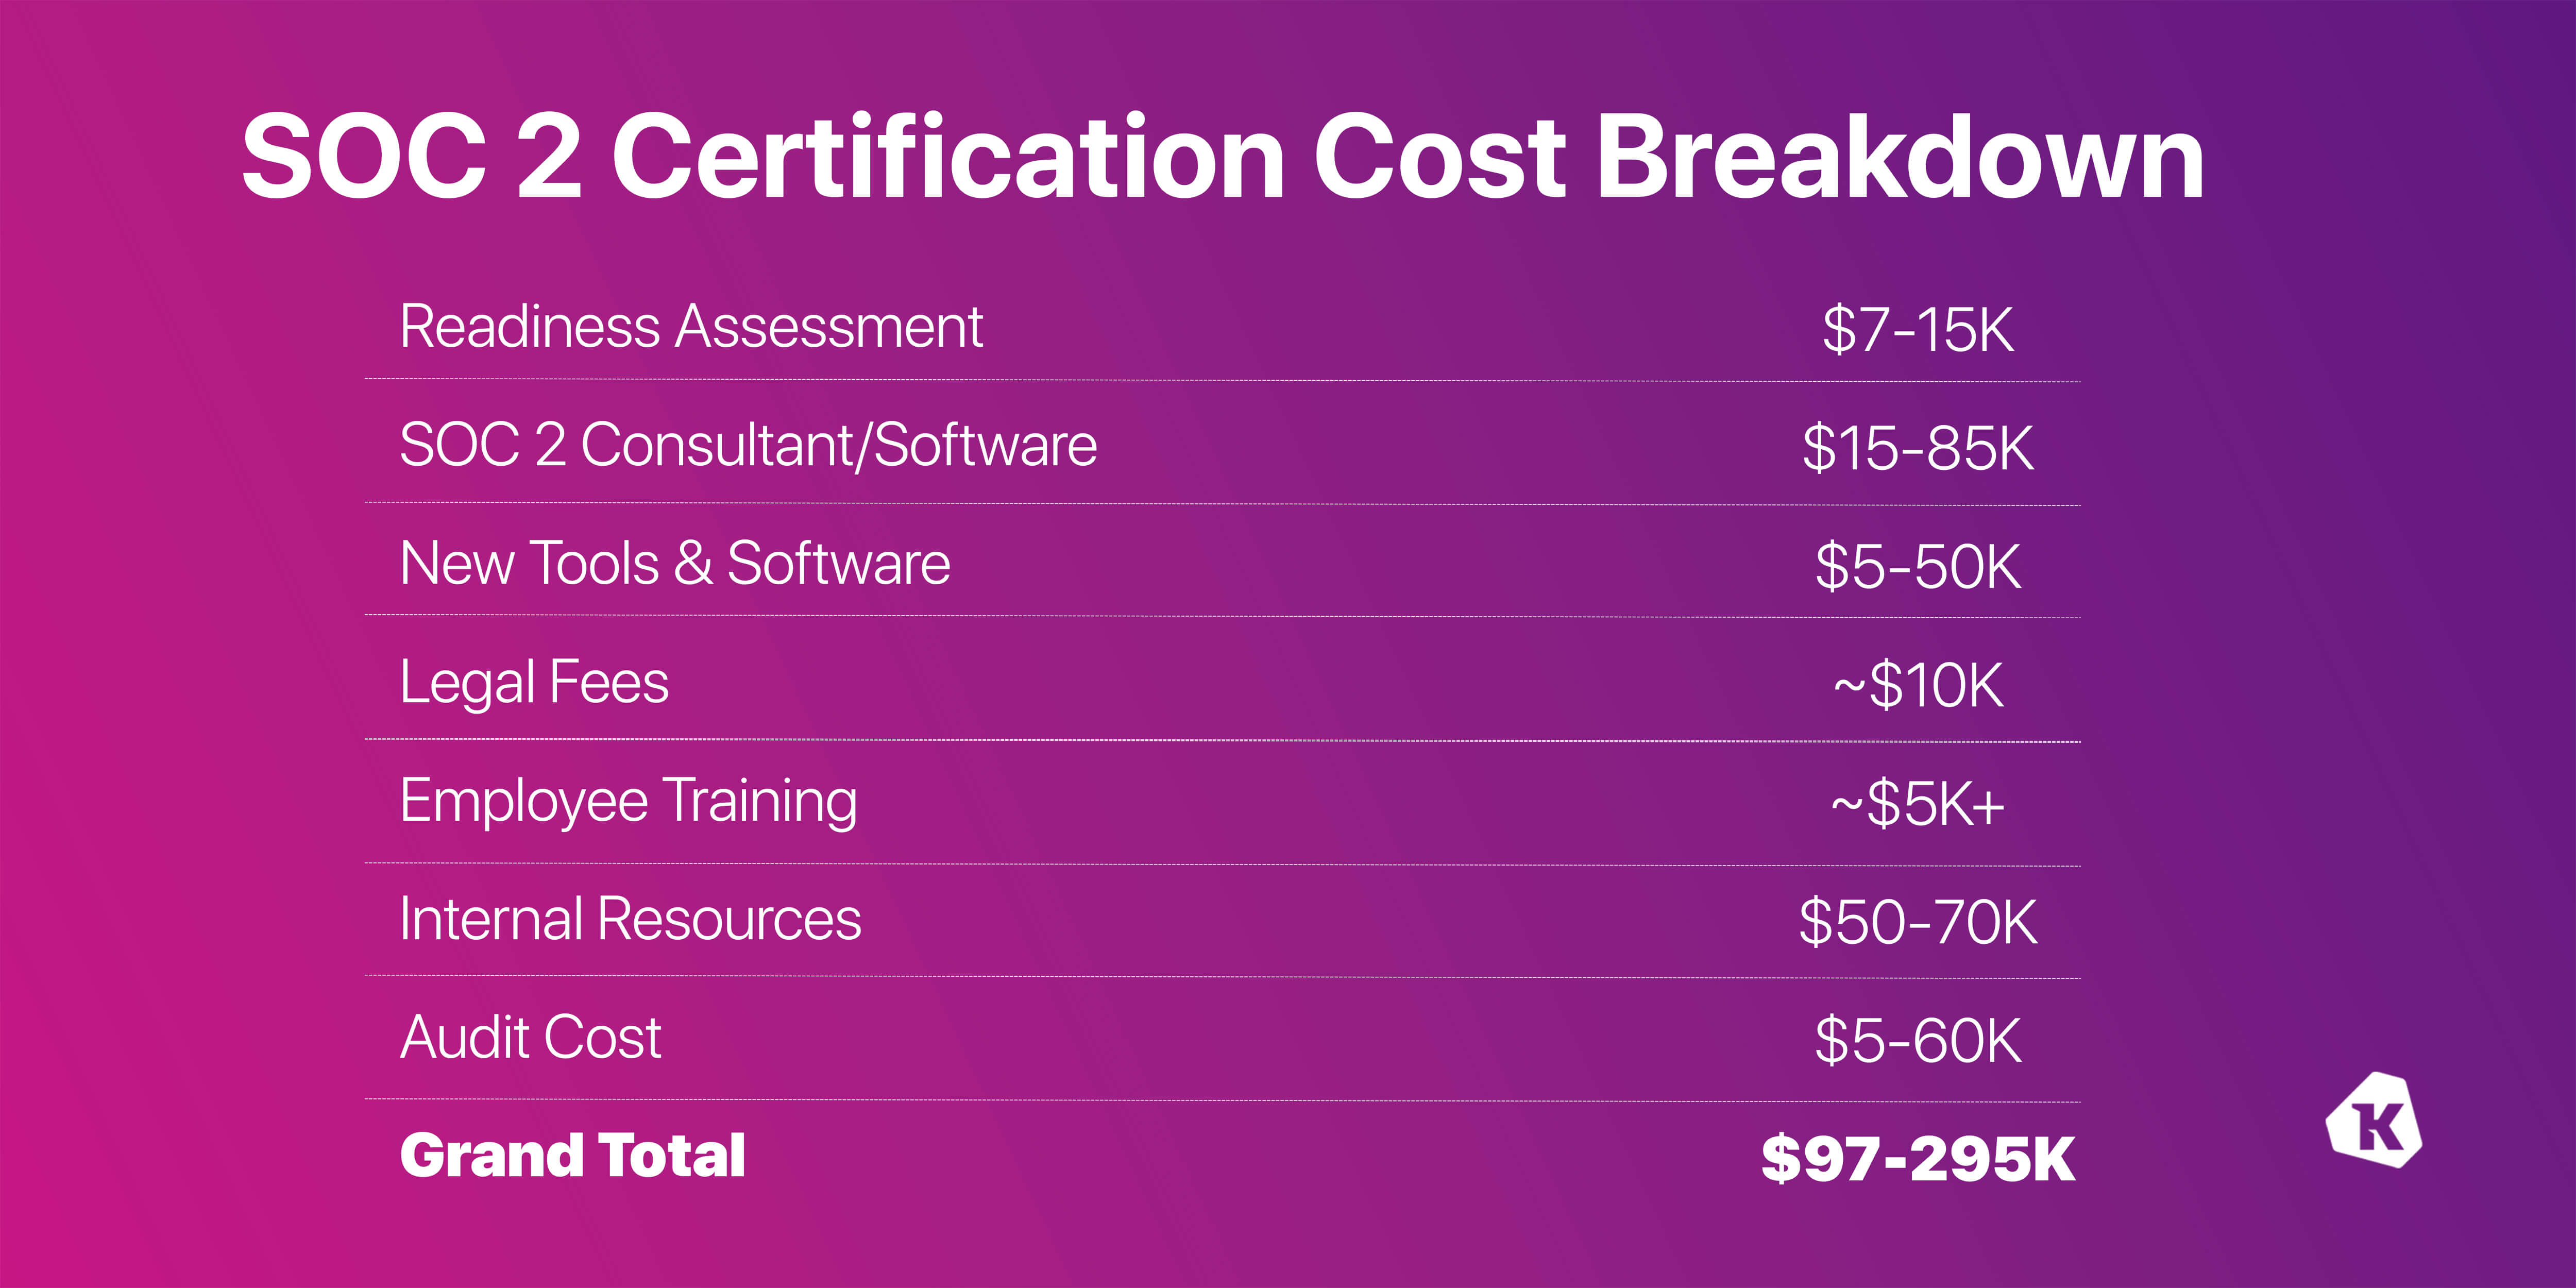 a graphic adding all the costs from the previous section, for a total between $97 and $295k